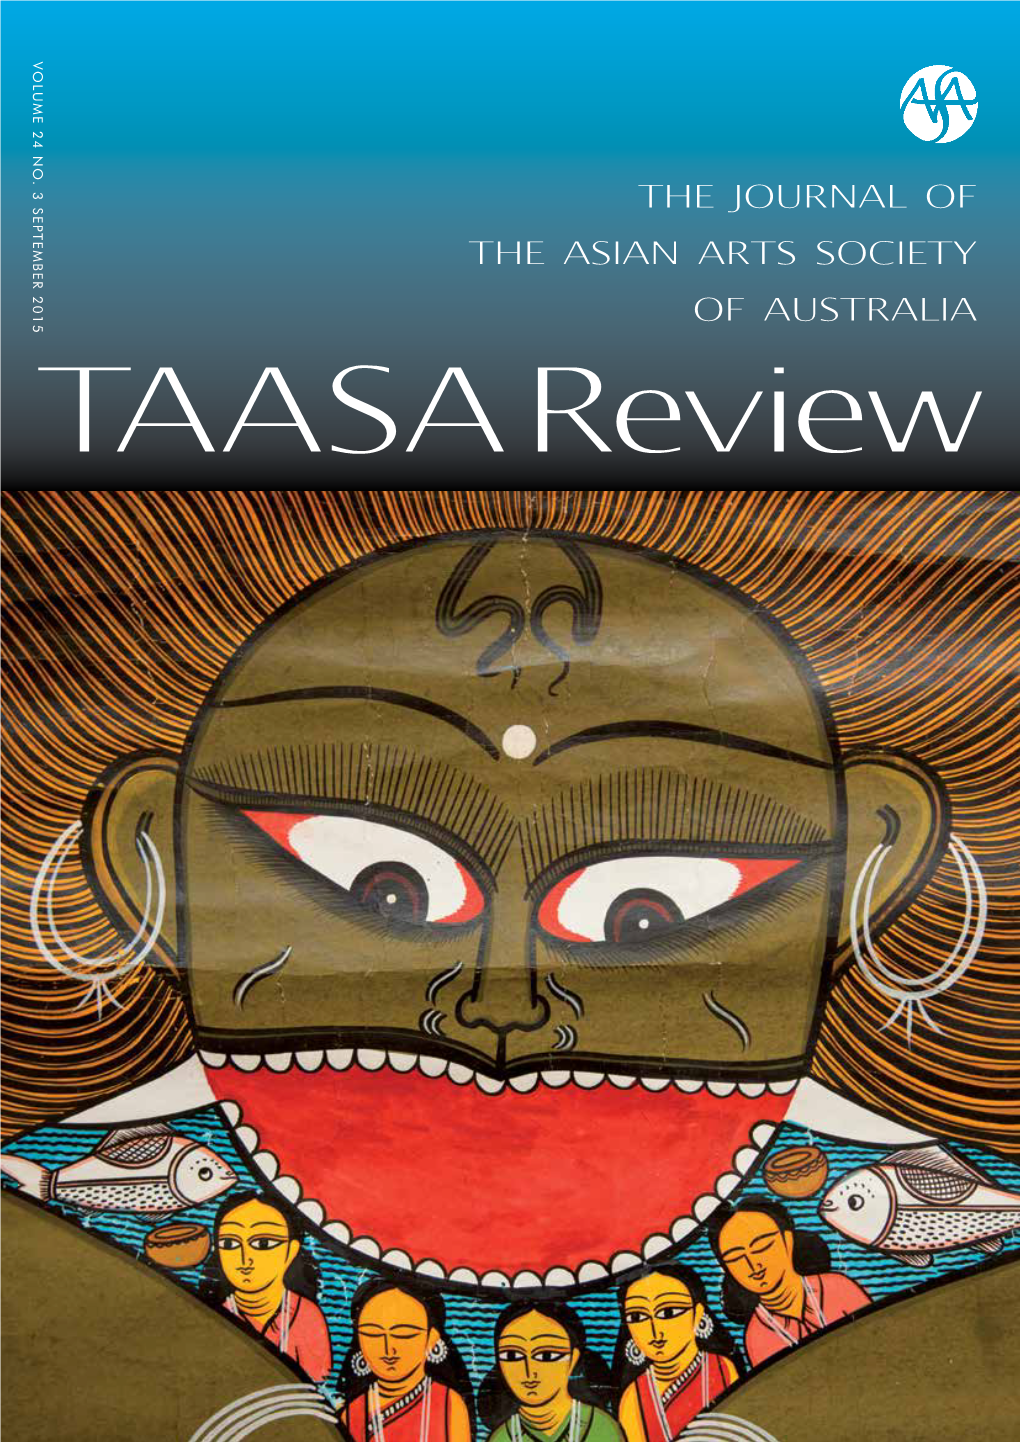 The Journal of the Asian Arts Society of Australia